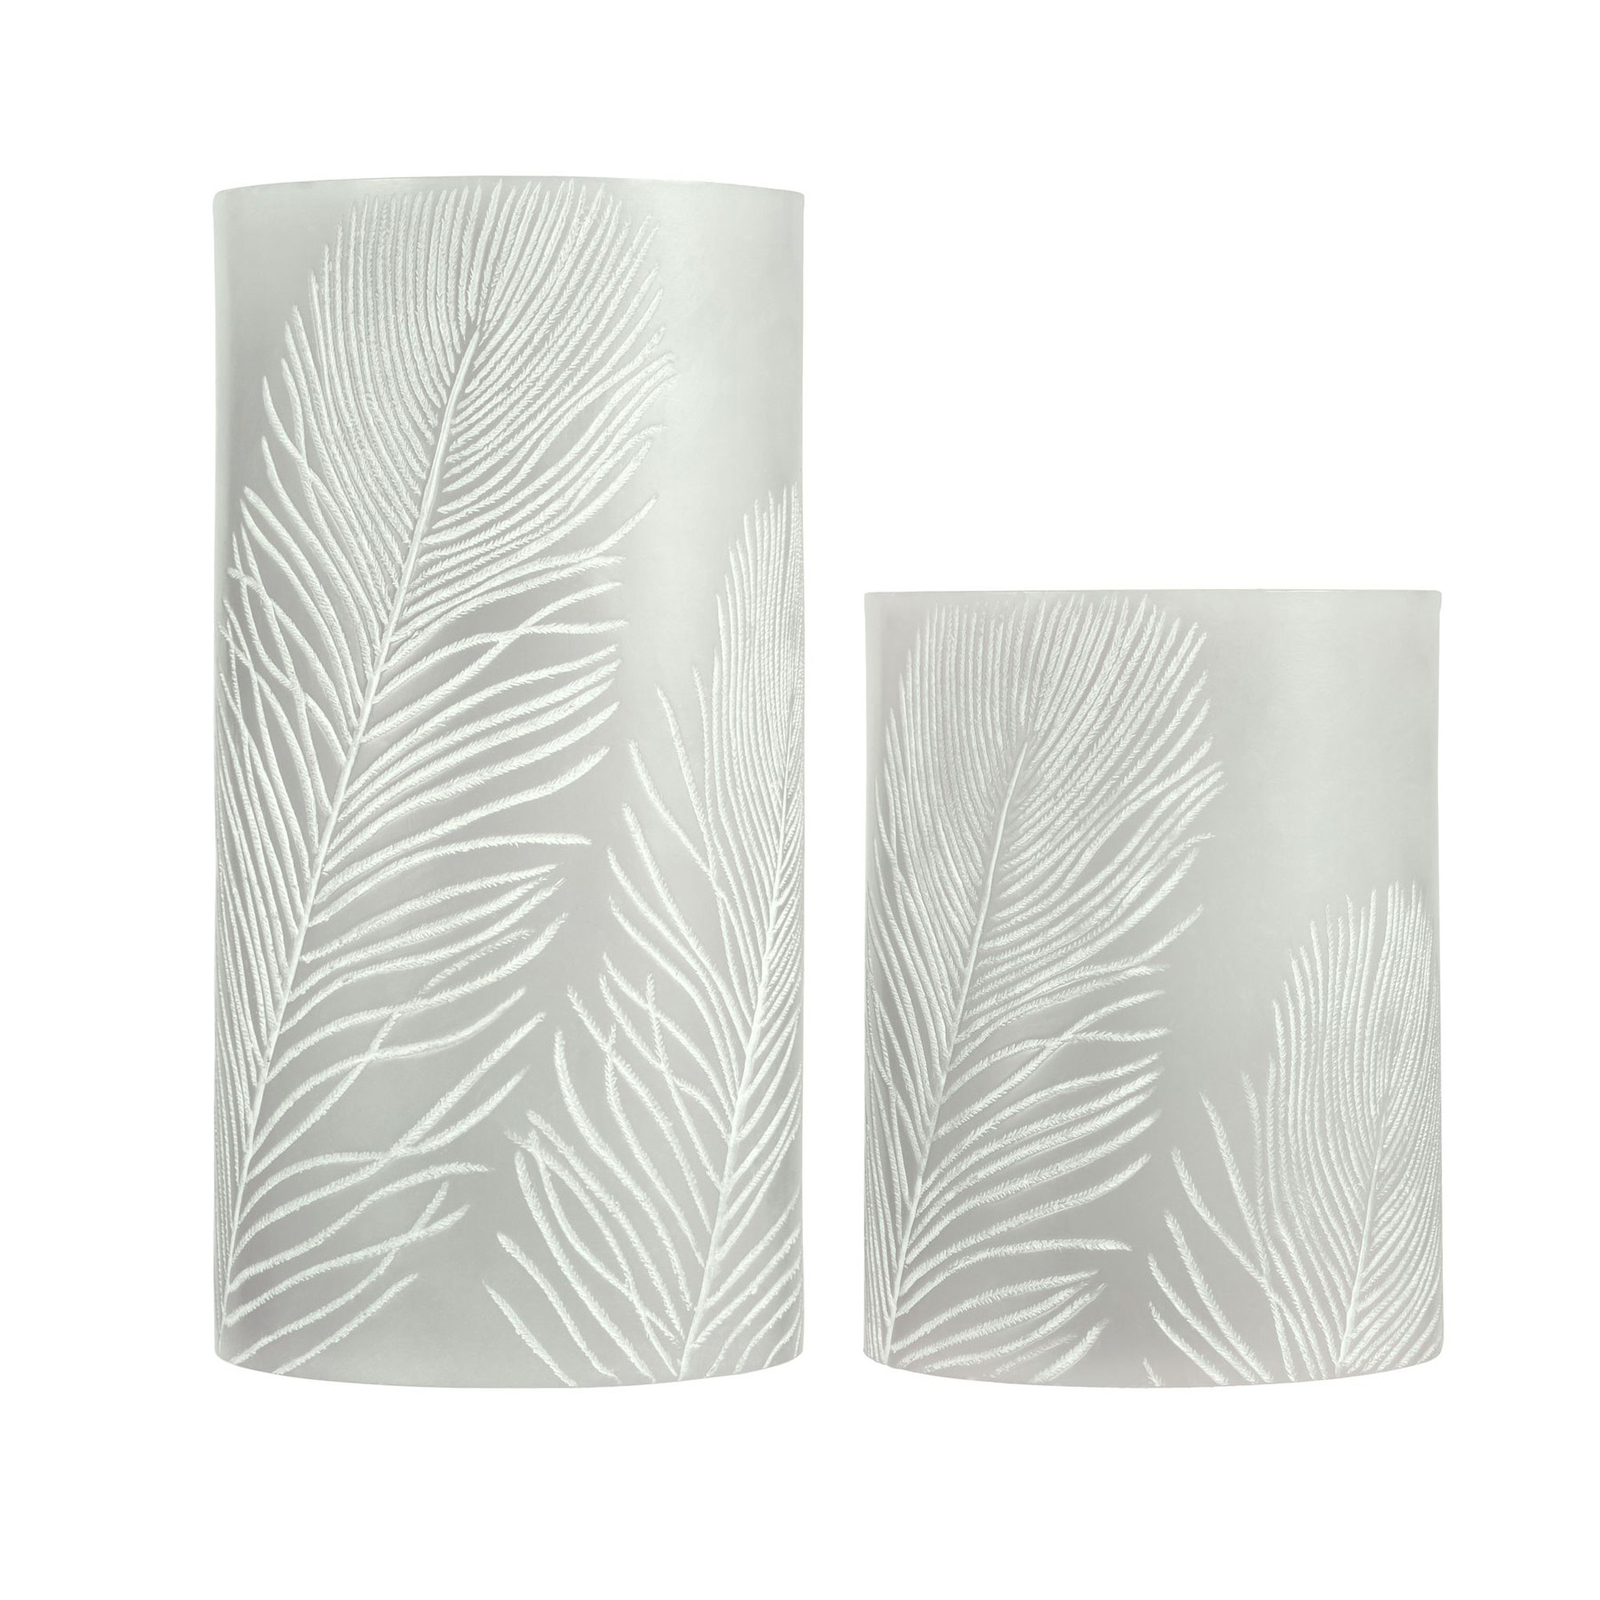 Pauleen Cosy Feather Candle LED kaars Set van 2